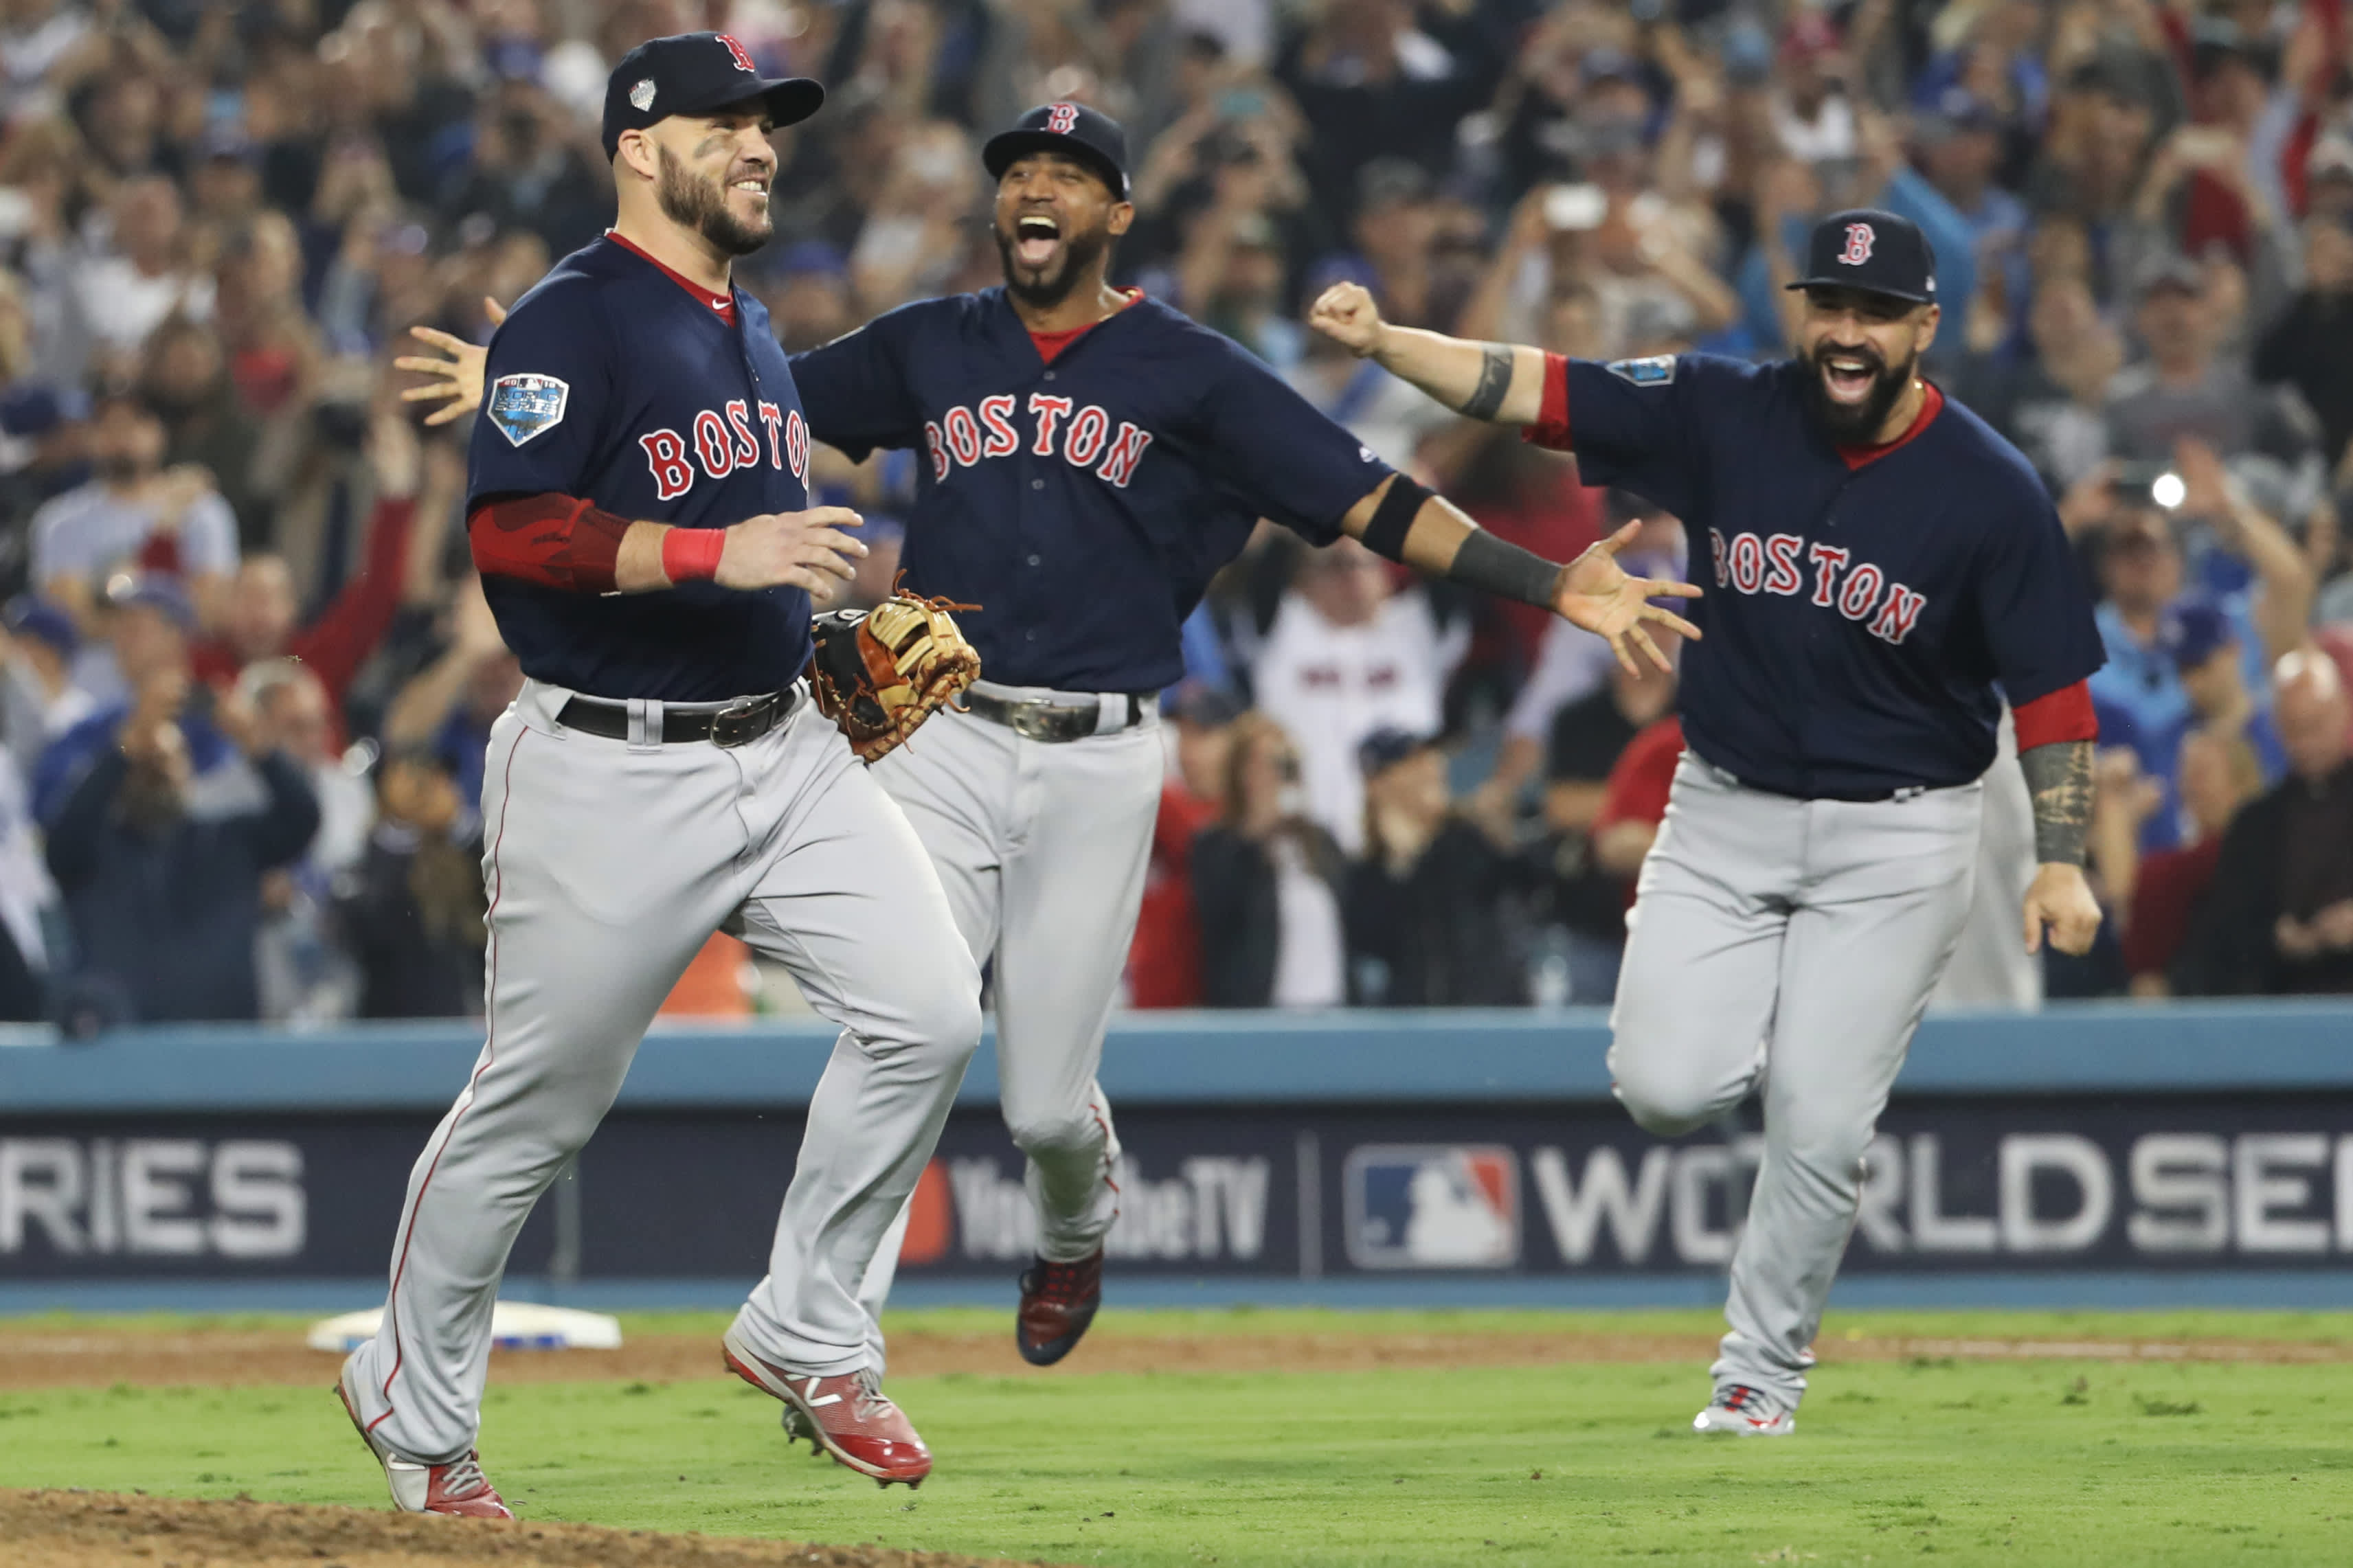 Boston Red Sox win the 2018 World Series over Dodgers in 5 games